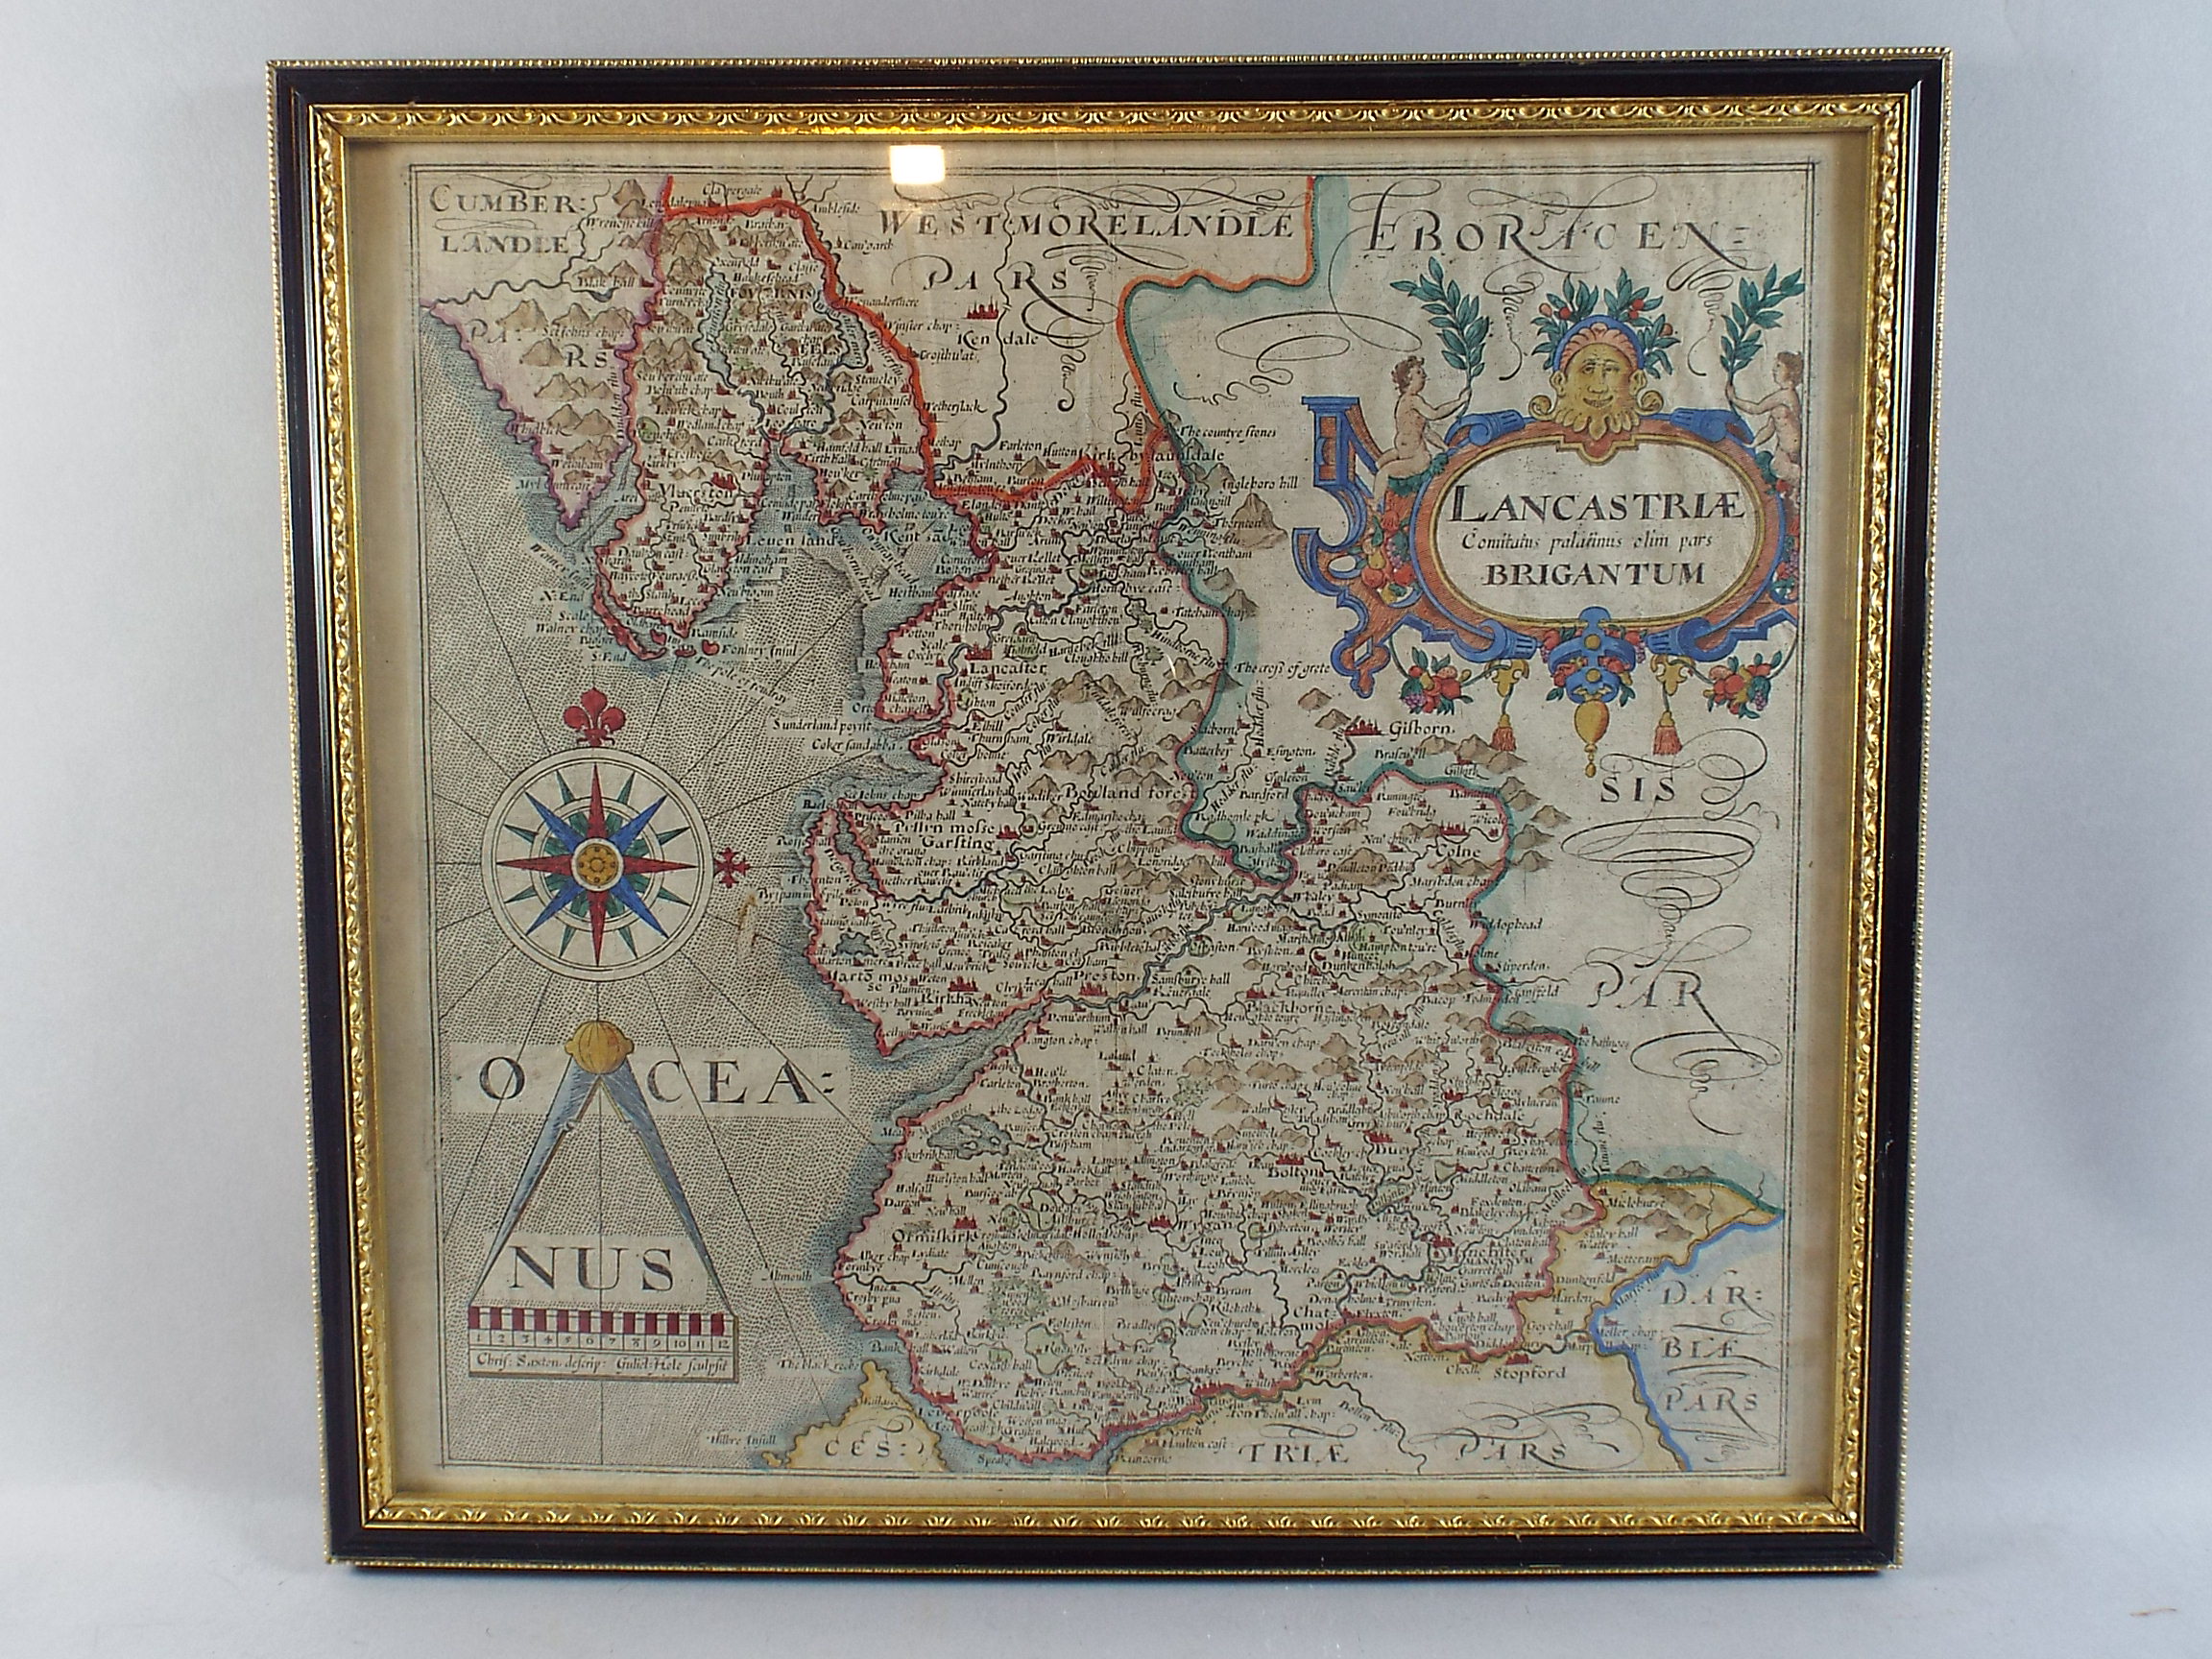 A Framed Hand Coloured Map of Lancashire By Christopher Saxton, Engraved By Guliel Hole. 30.5x29.